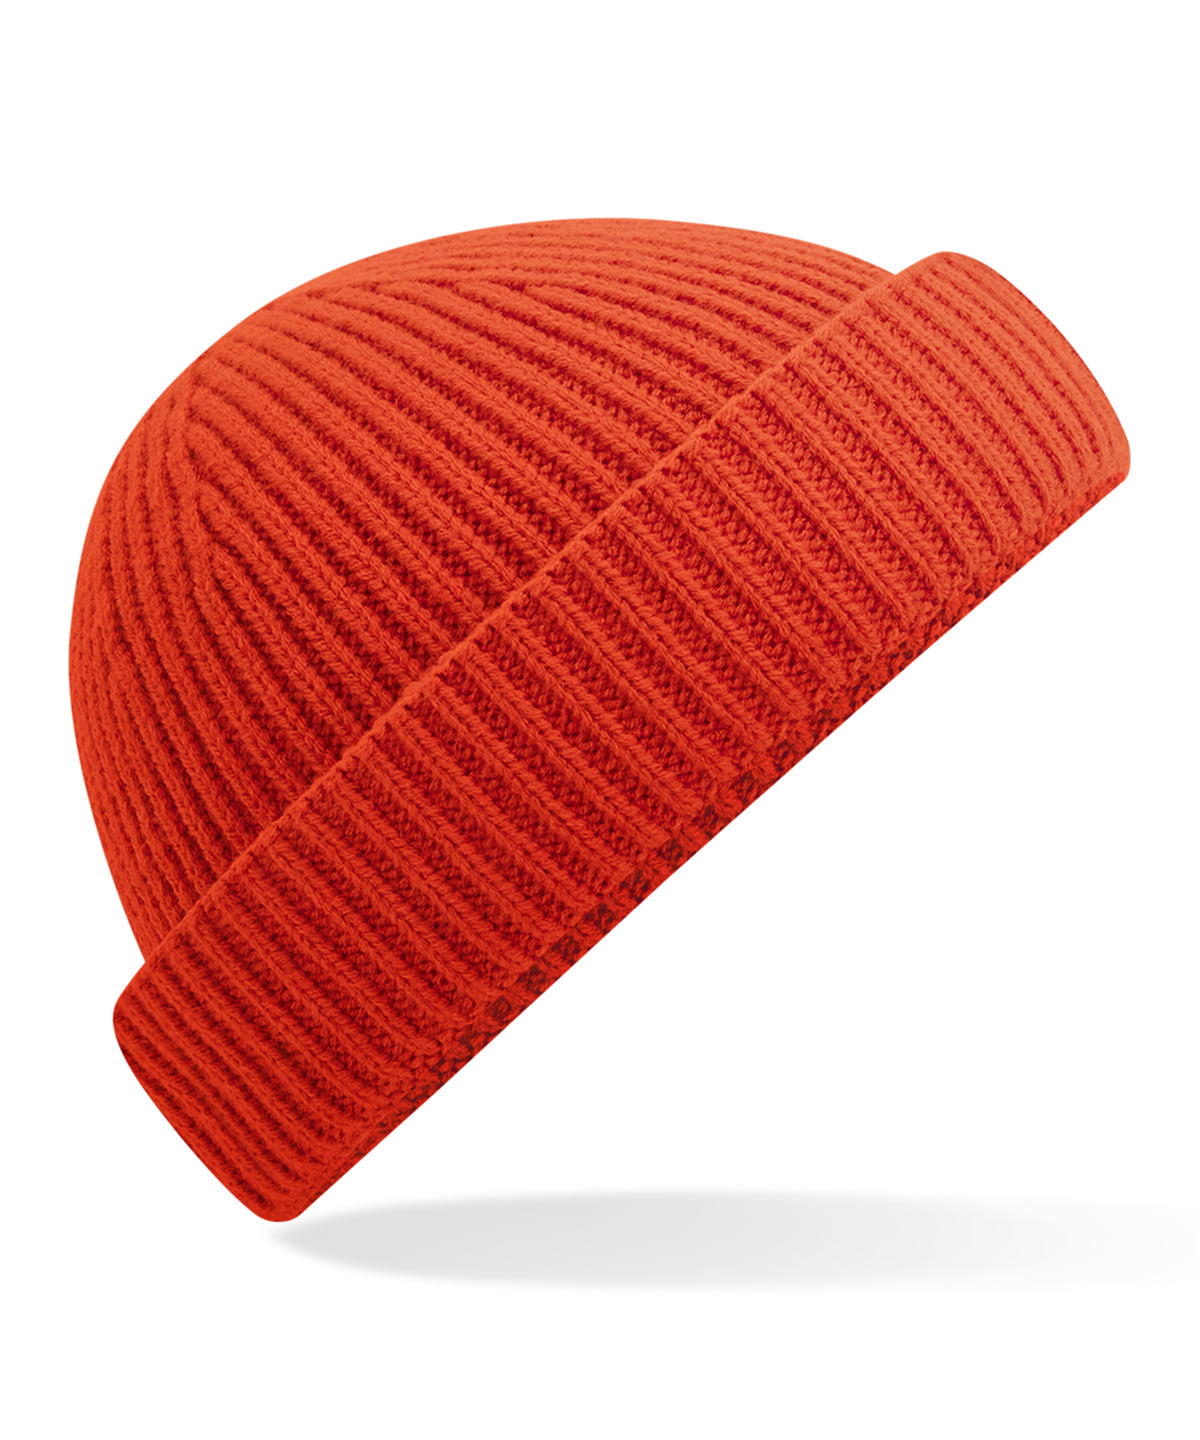 Personalised Hats - Mid Red Beechfield Harbour beanie